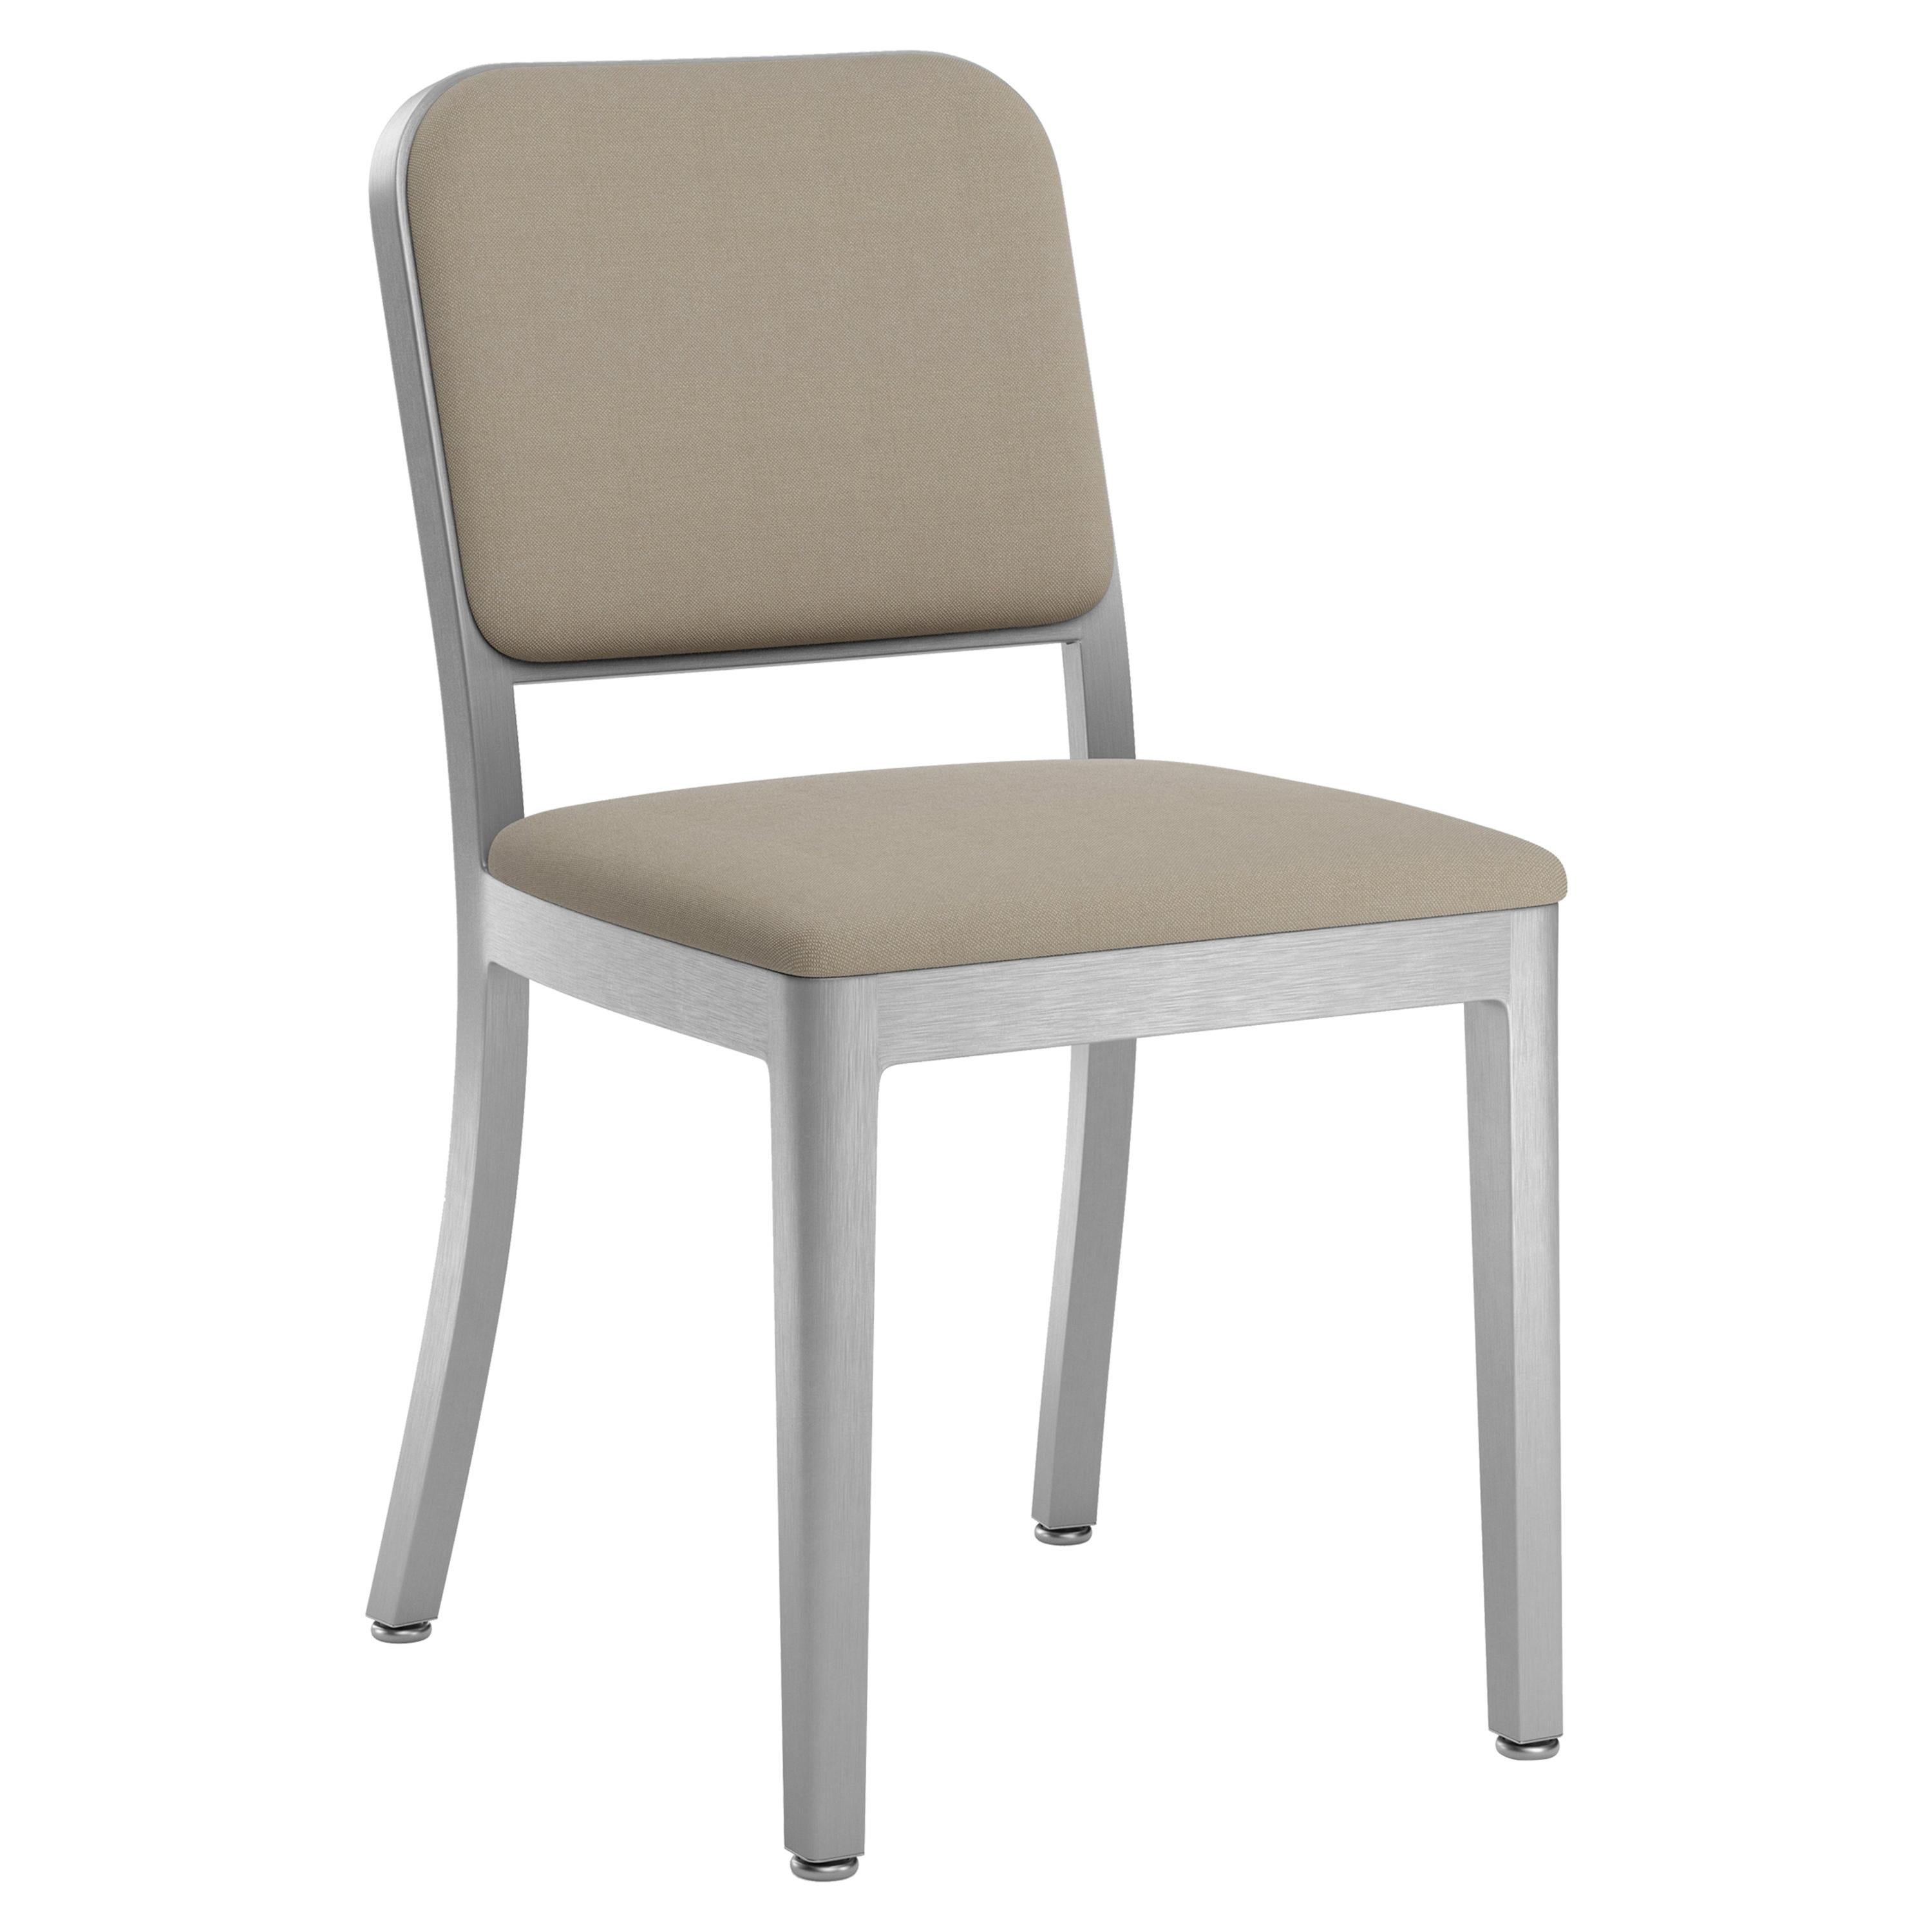 Emeco Navy Officer Side Chair in Beige Fabric with Brushed Aluminum Frame For Sale